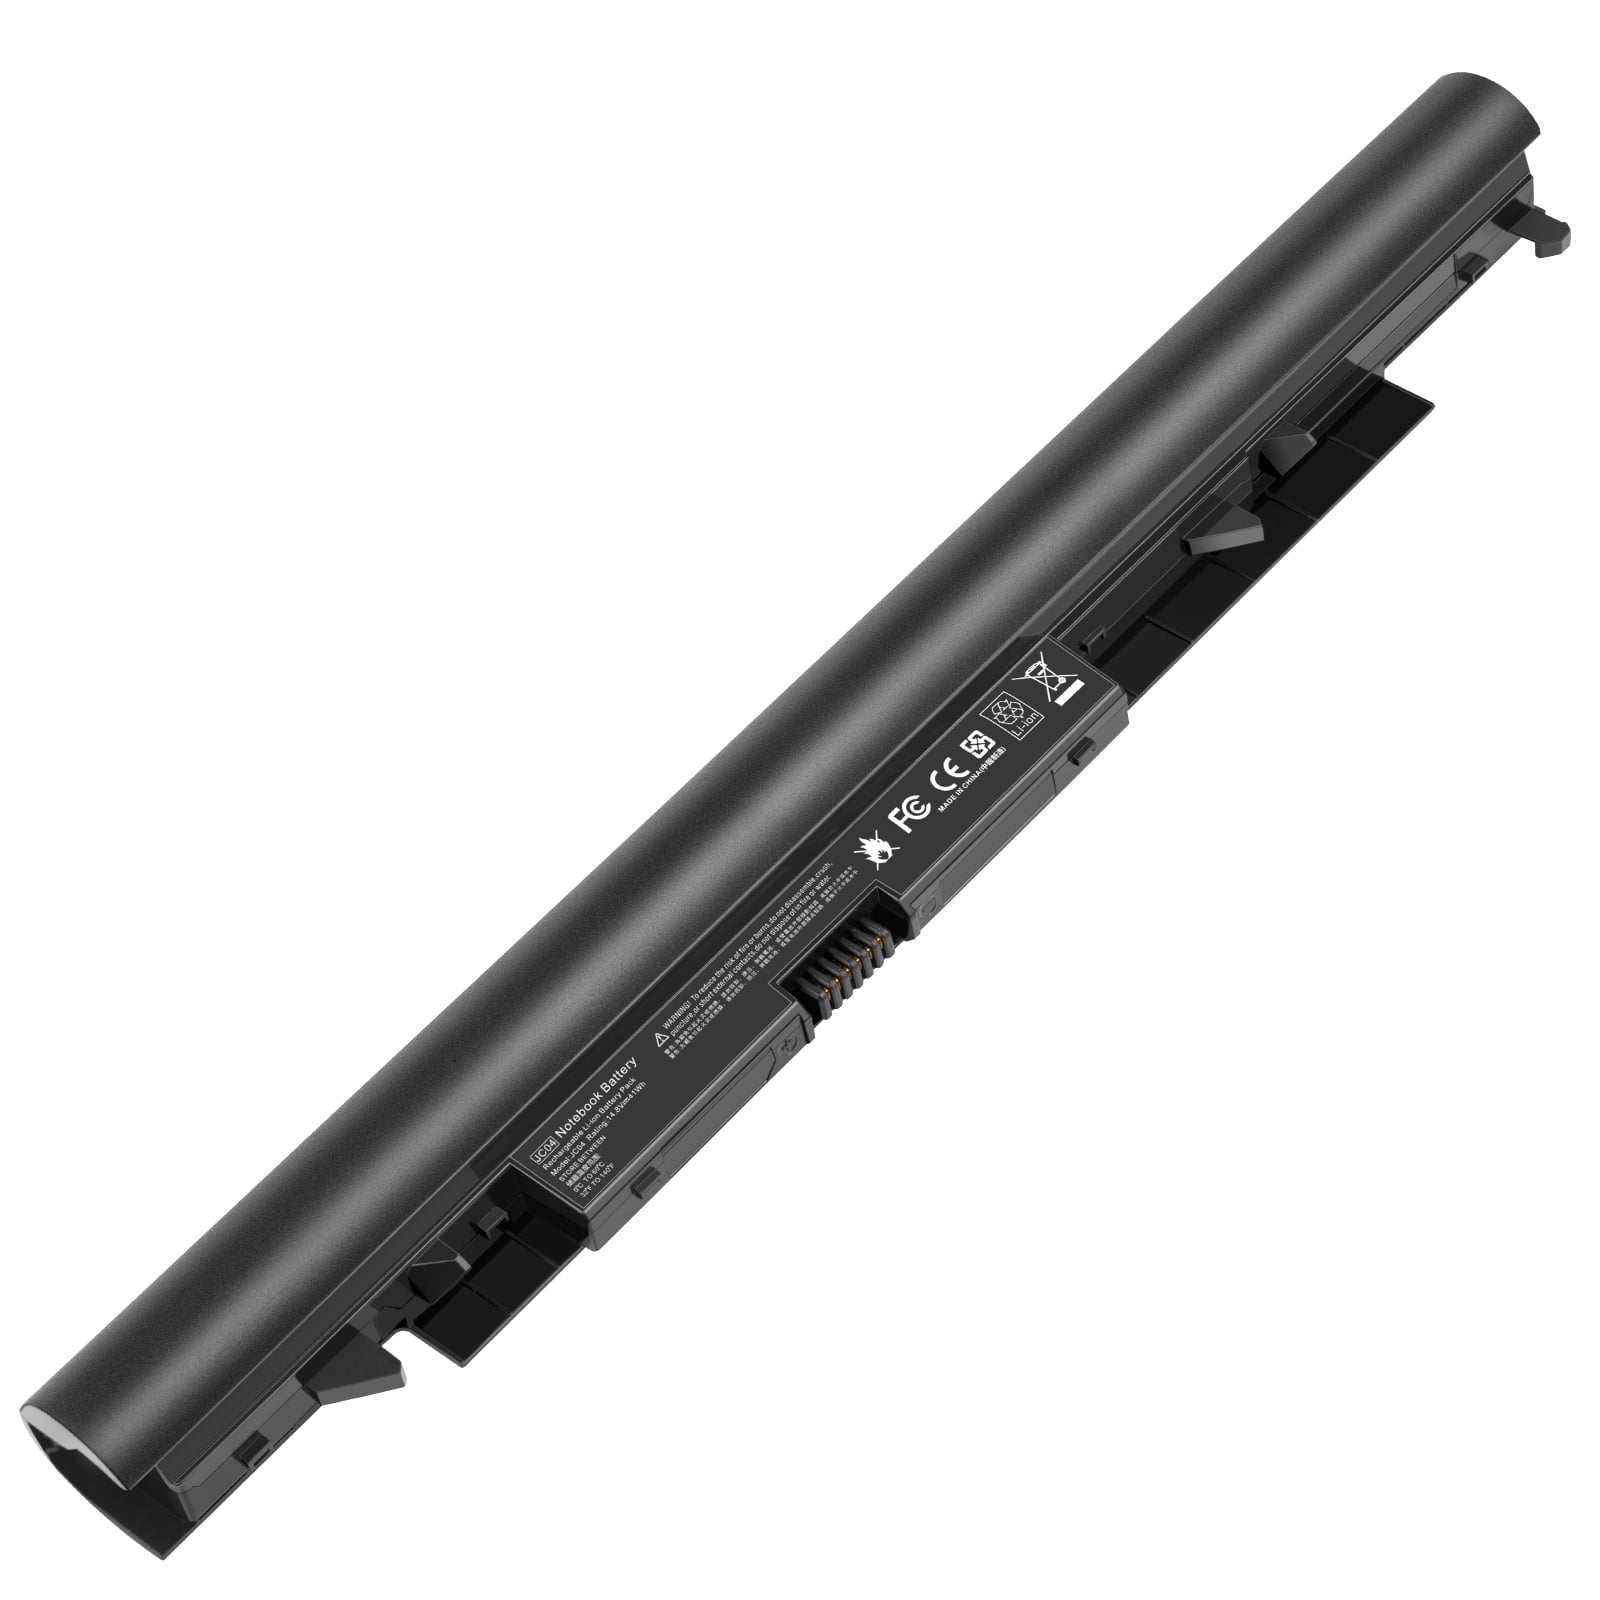 Spare 919700-850 Battery for HP Computers 15-bs289wm 15-bs015dx 15-bs113dx 15-bs115dx 15-bs060wm Jc04 Jc03